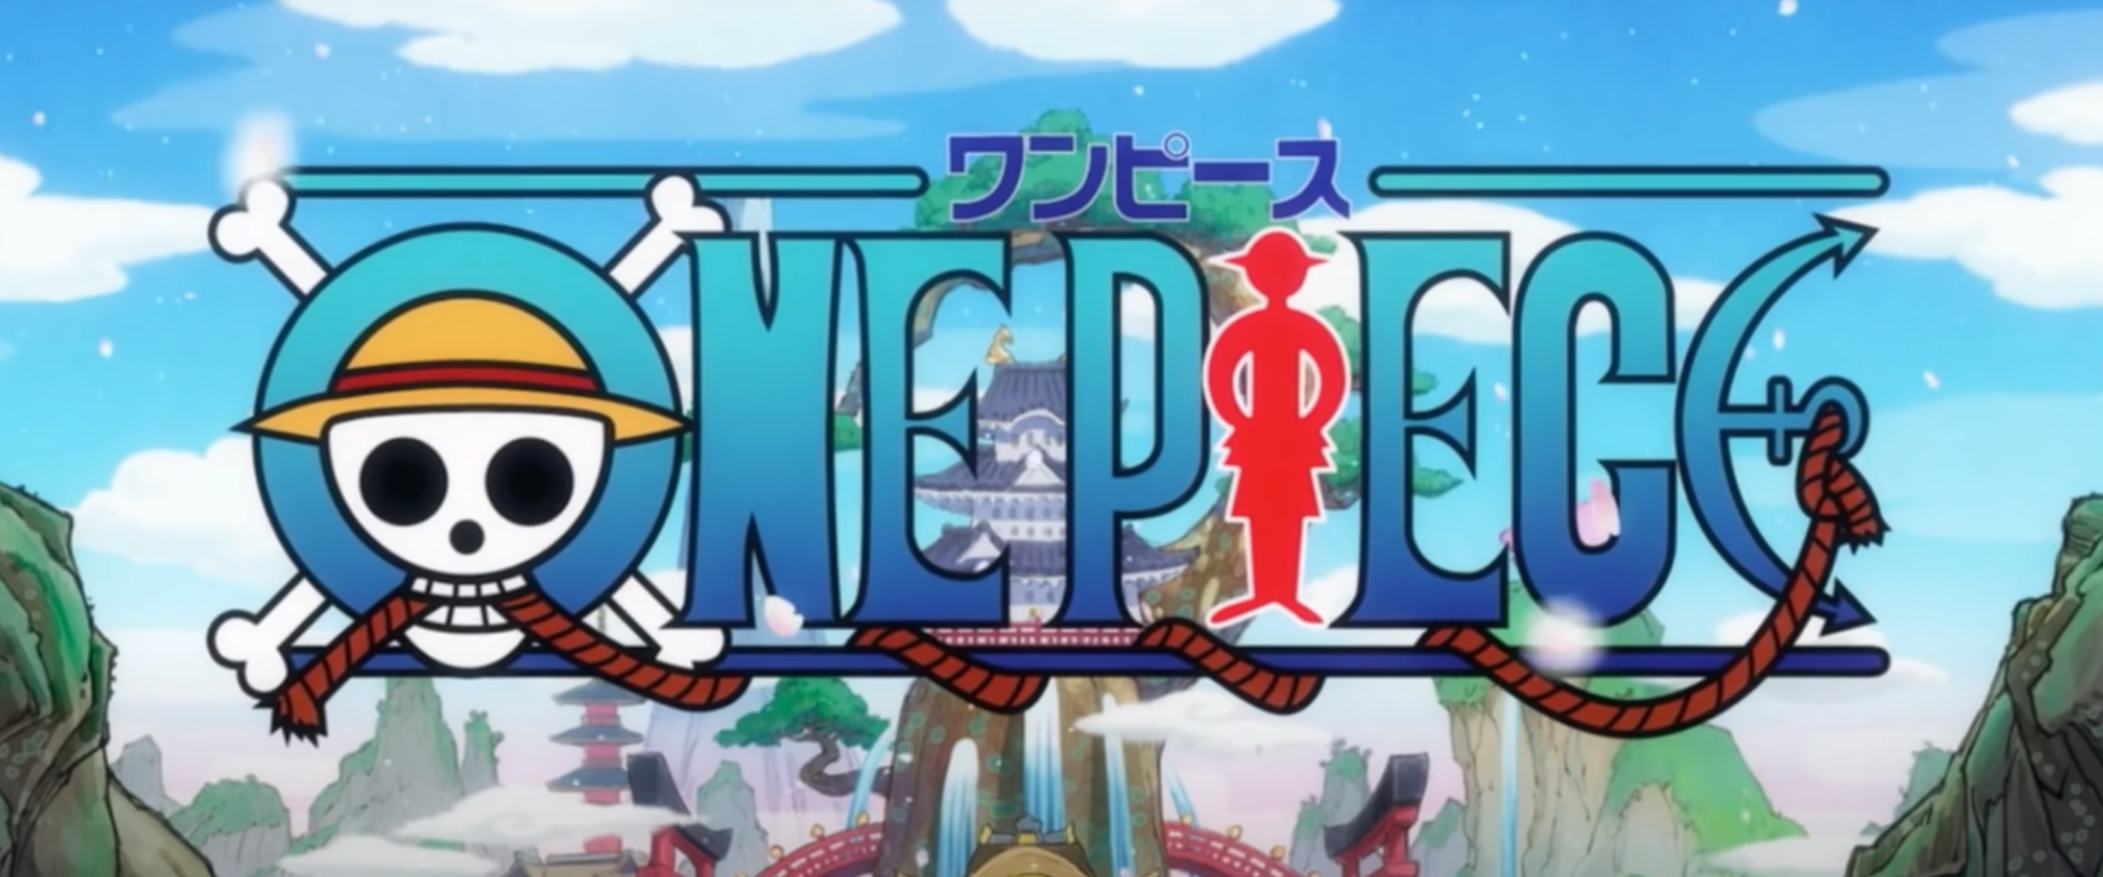 'One Piece' Episode 1000 Dub Will Premier At Anime Expo